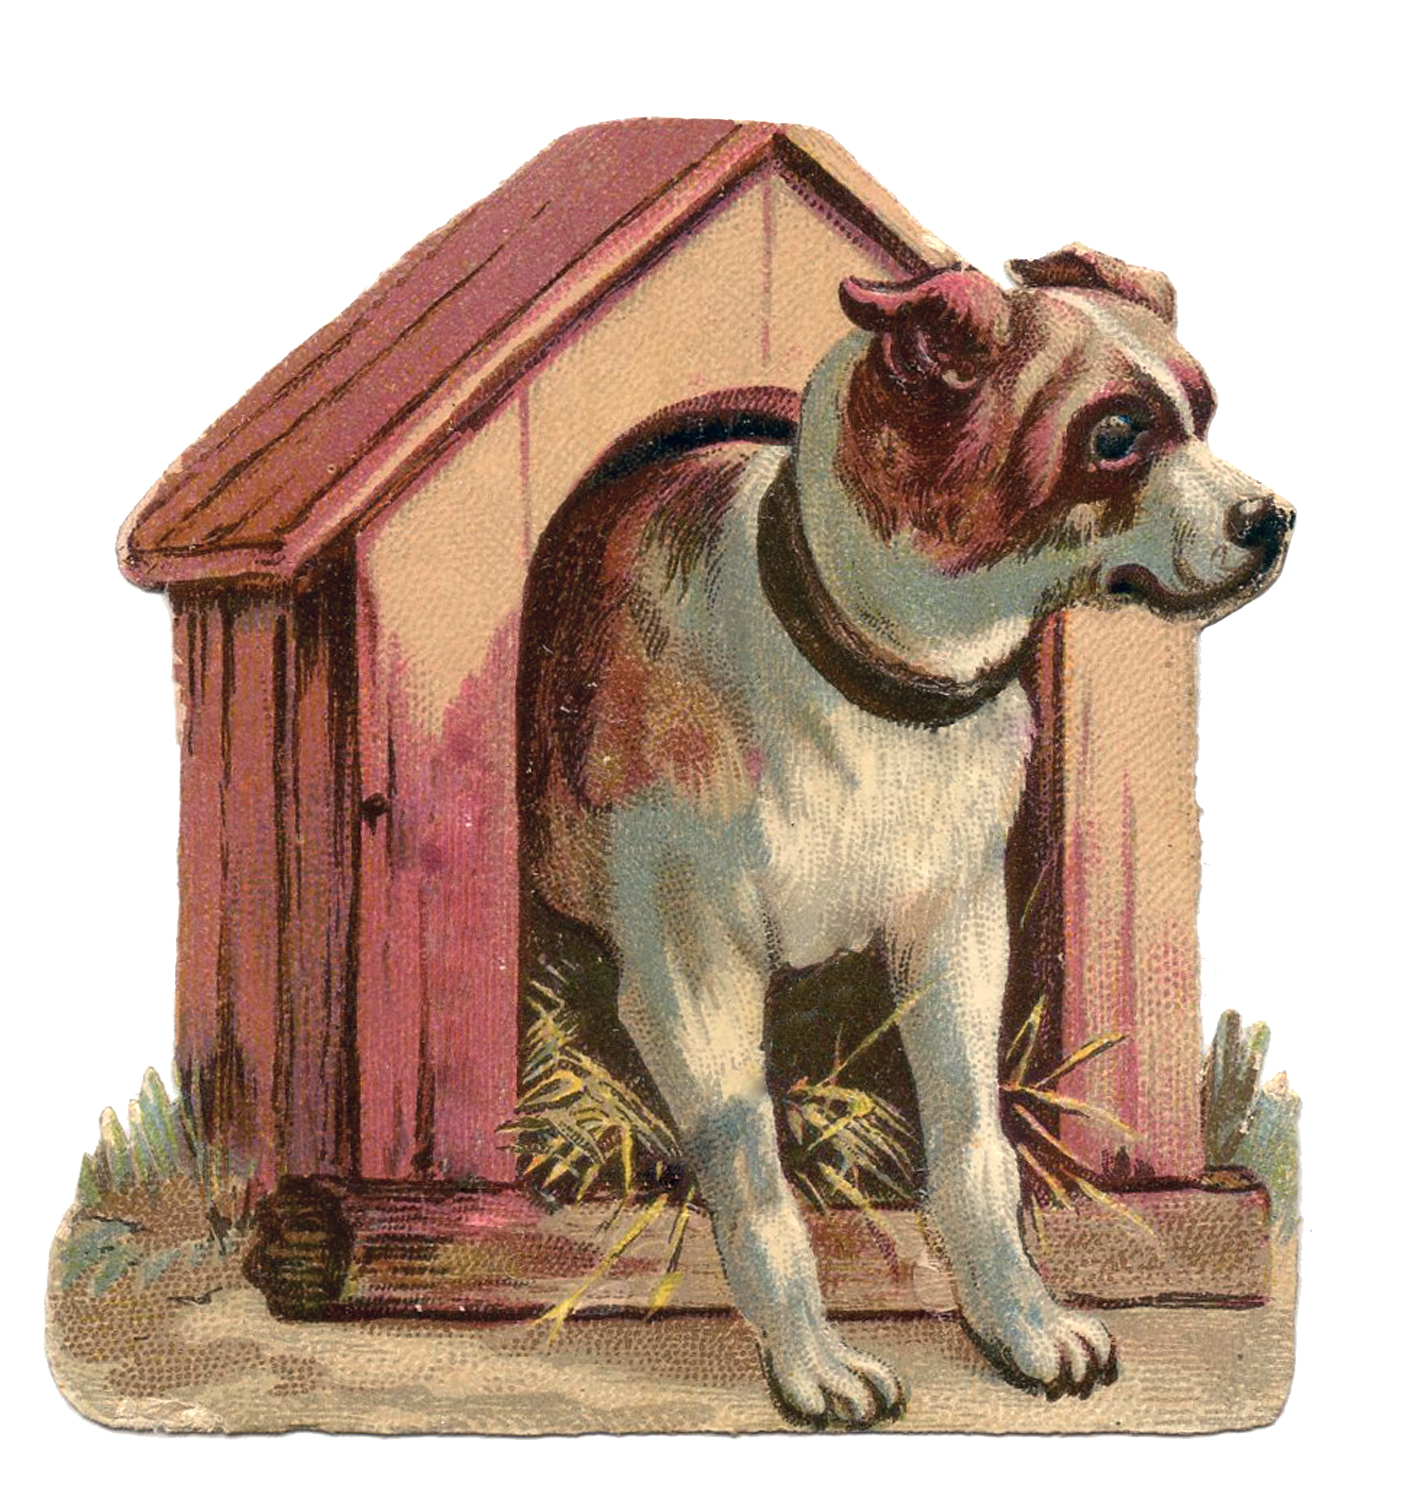     Shows A Dog In A Little Dog House The House Looks A Bit Small For Him